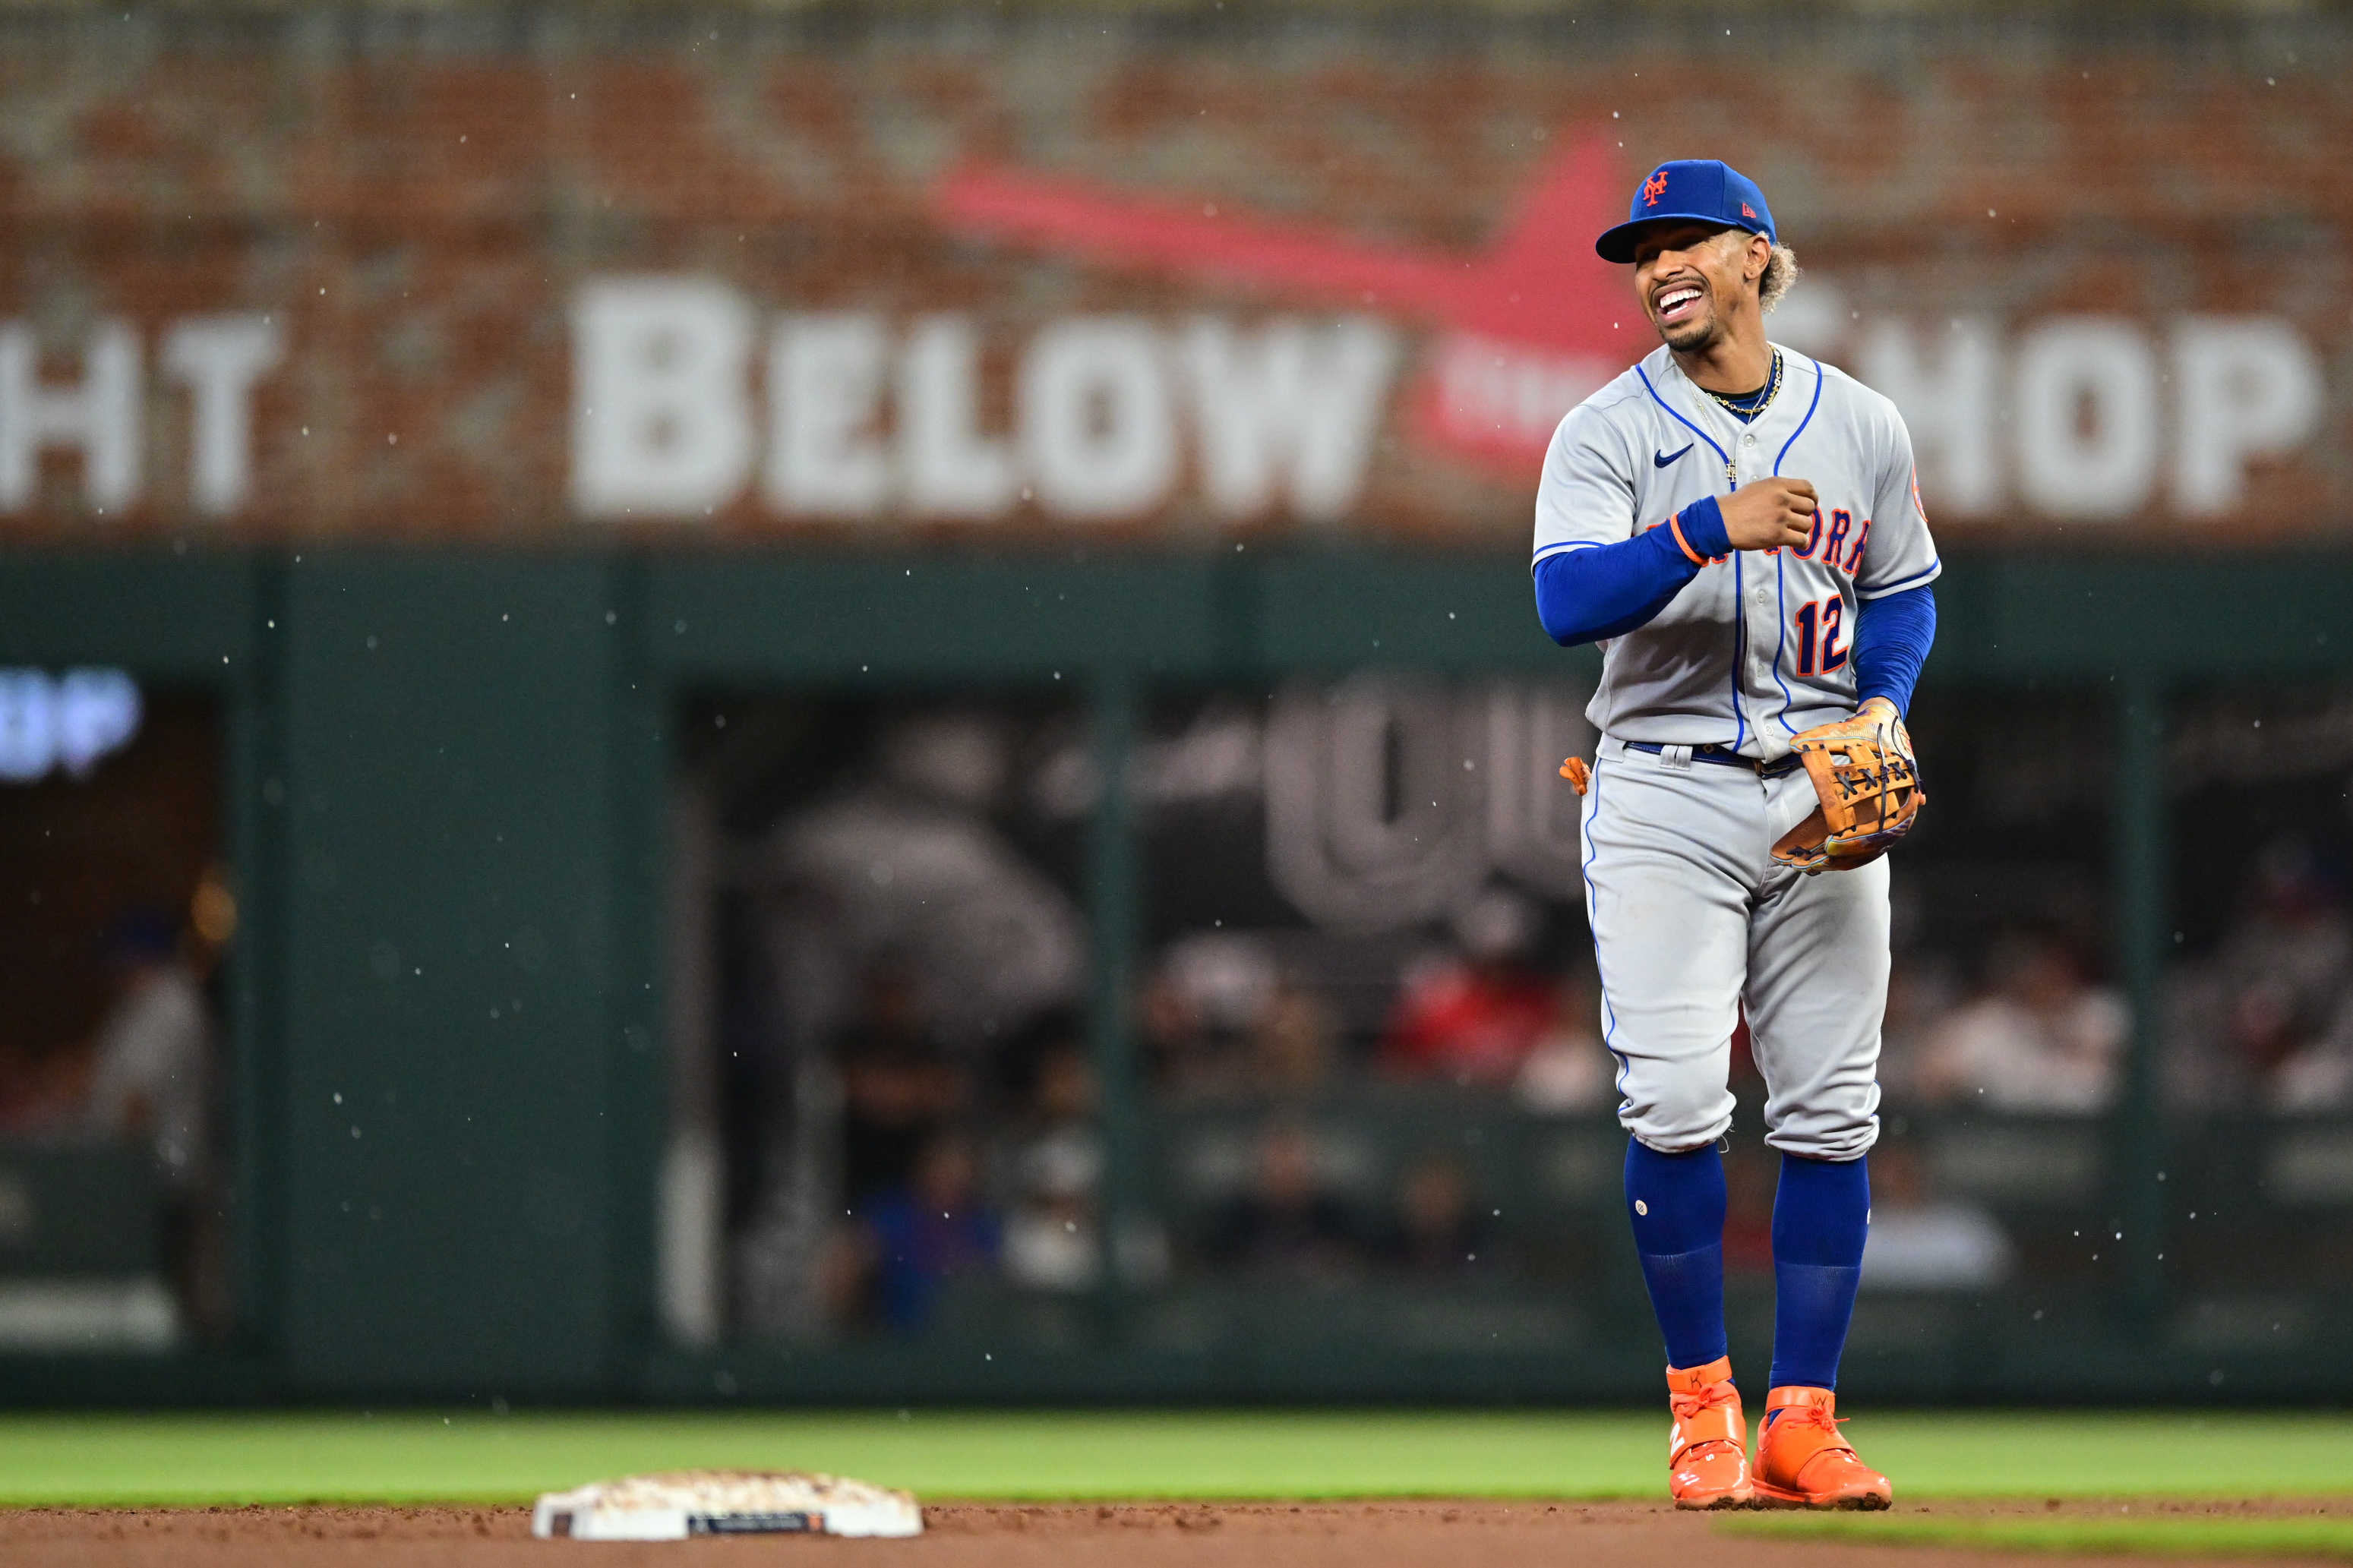 WBC Preview: Absences Could Cost a Fun Puerto Rican Squad